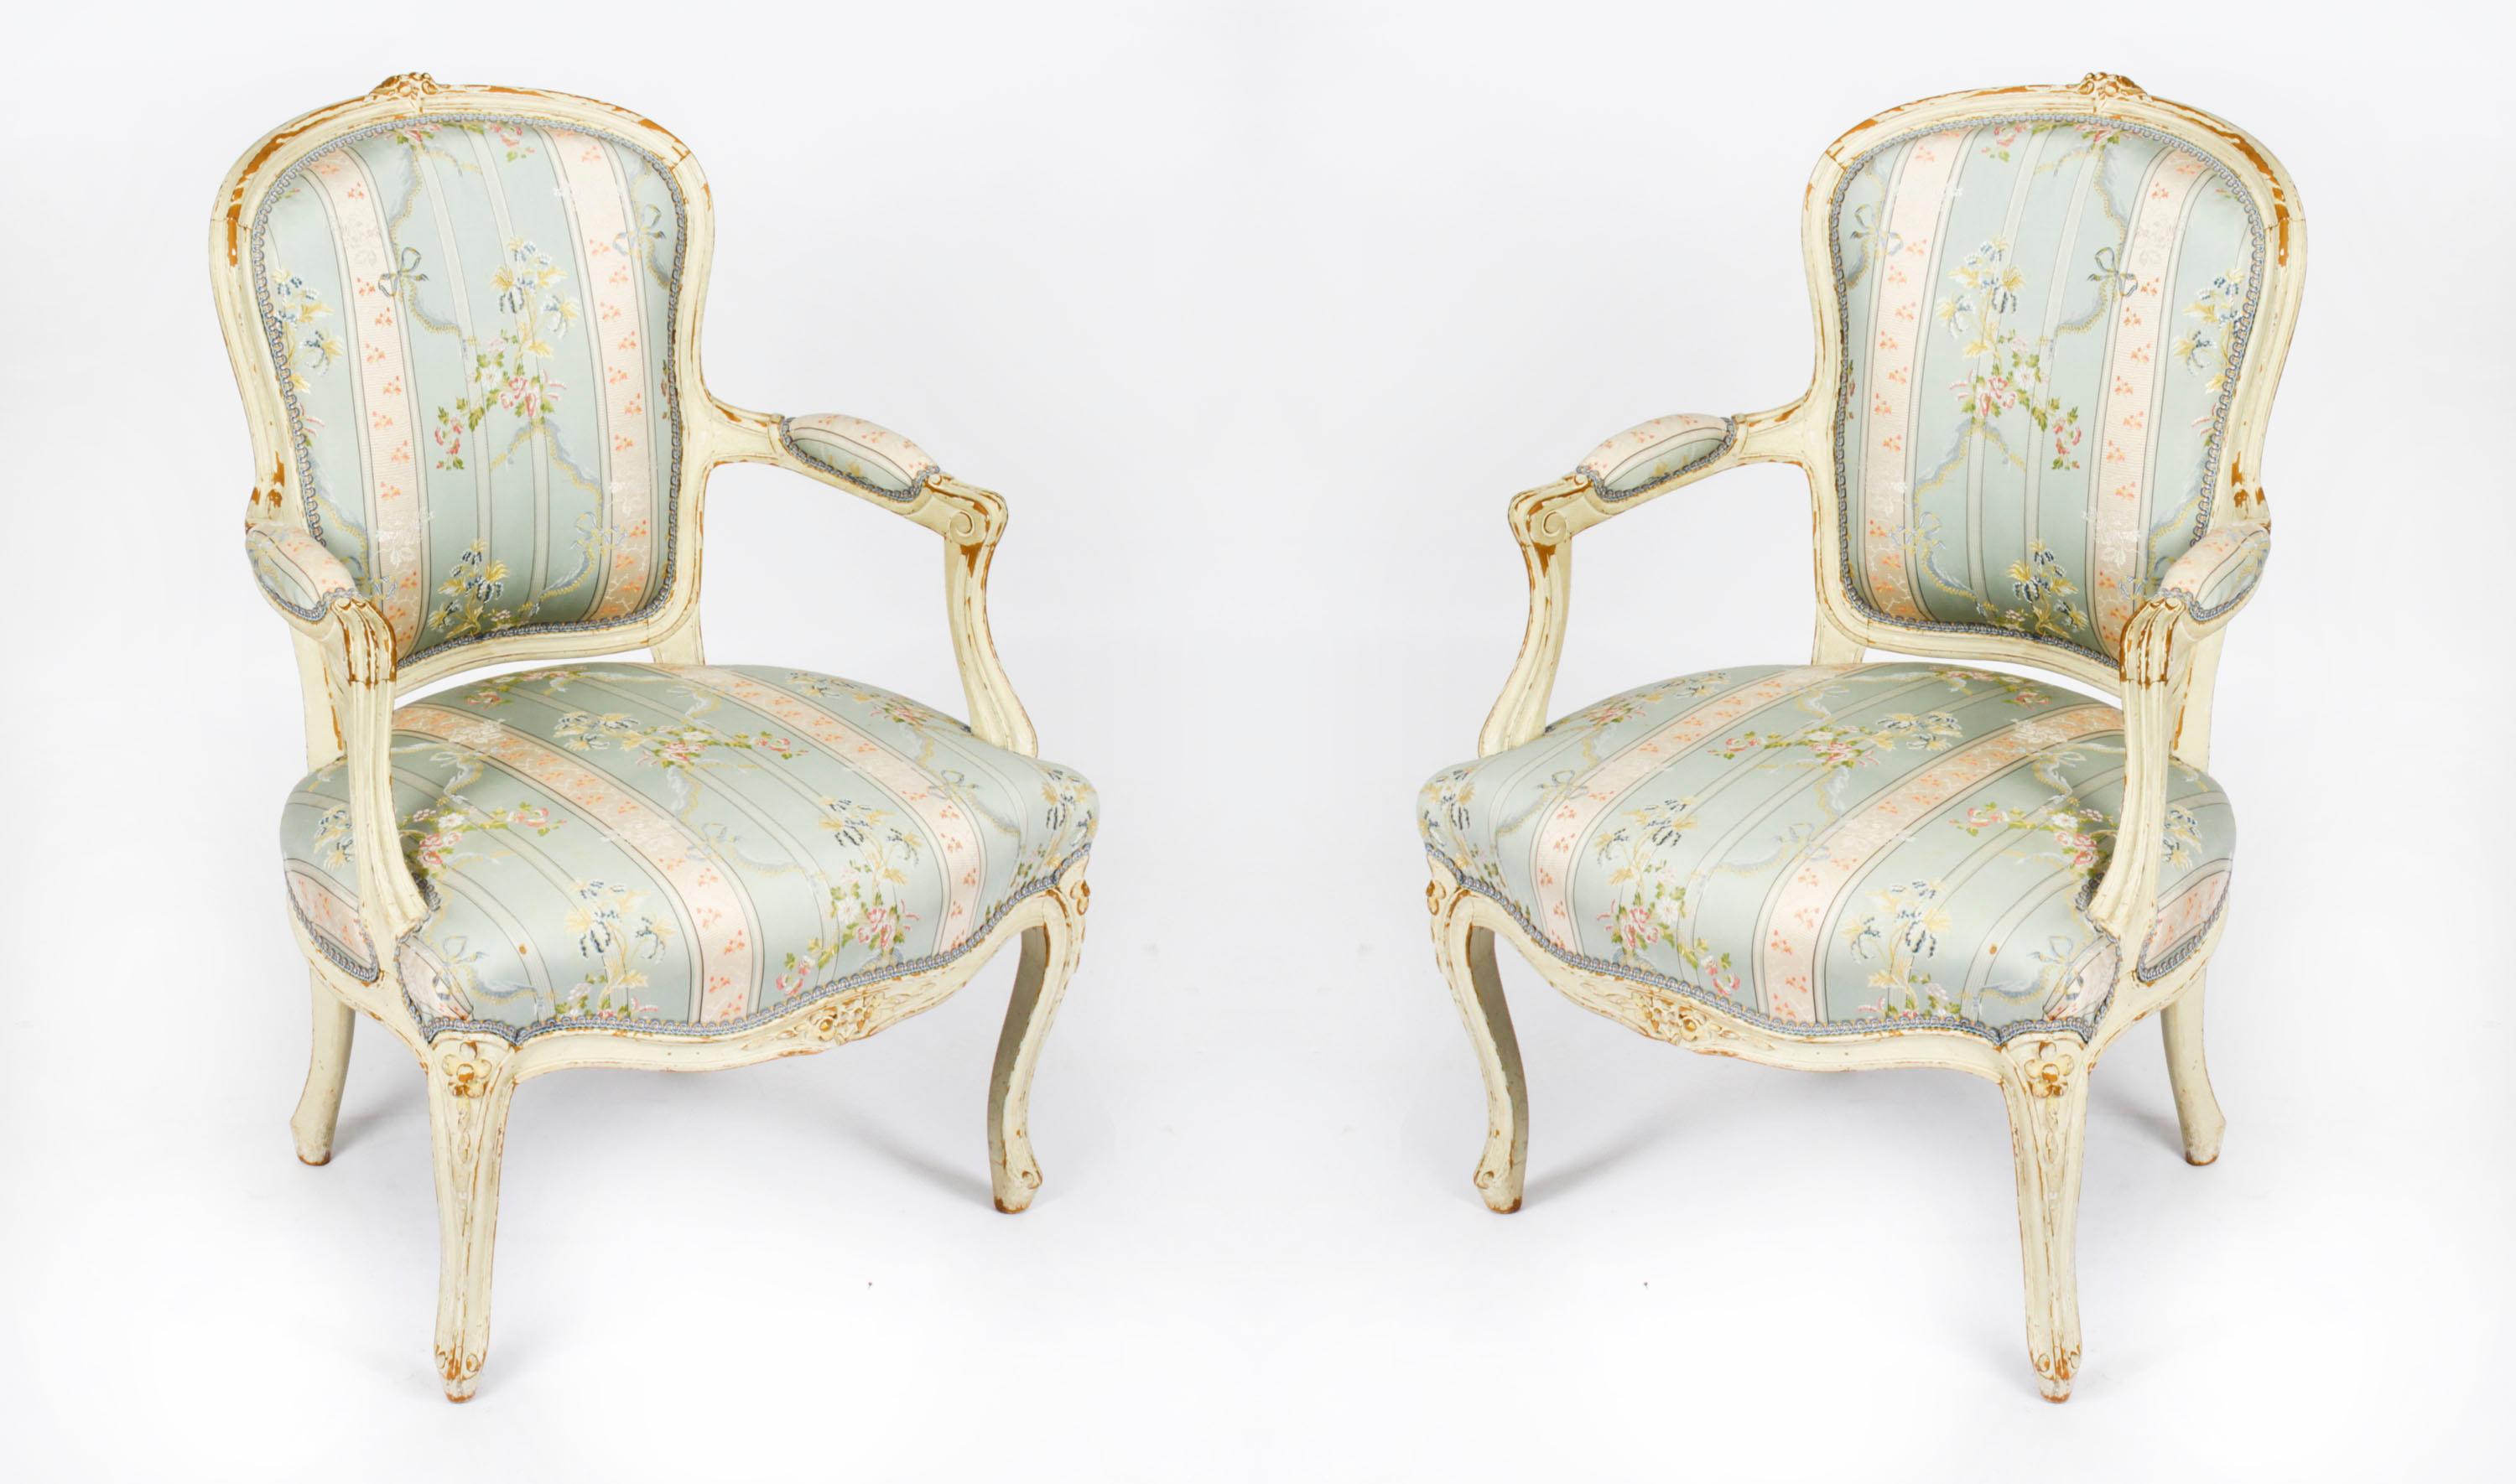 Antique Pair Shabby Chic Louis Revival French Painted Armchairs, 19th Century For Sale 12